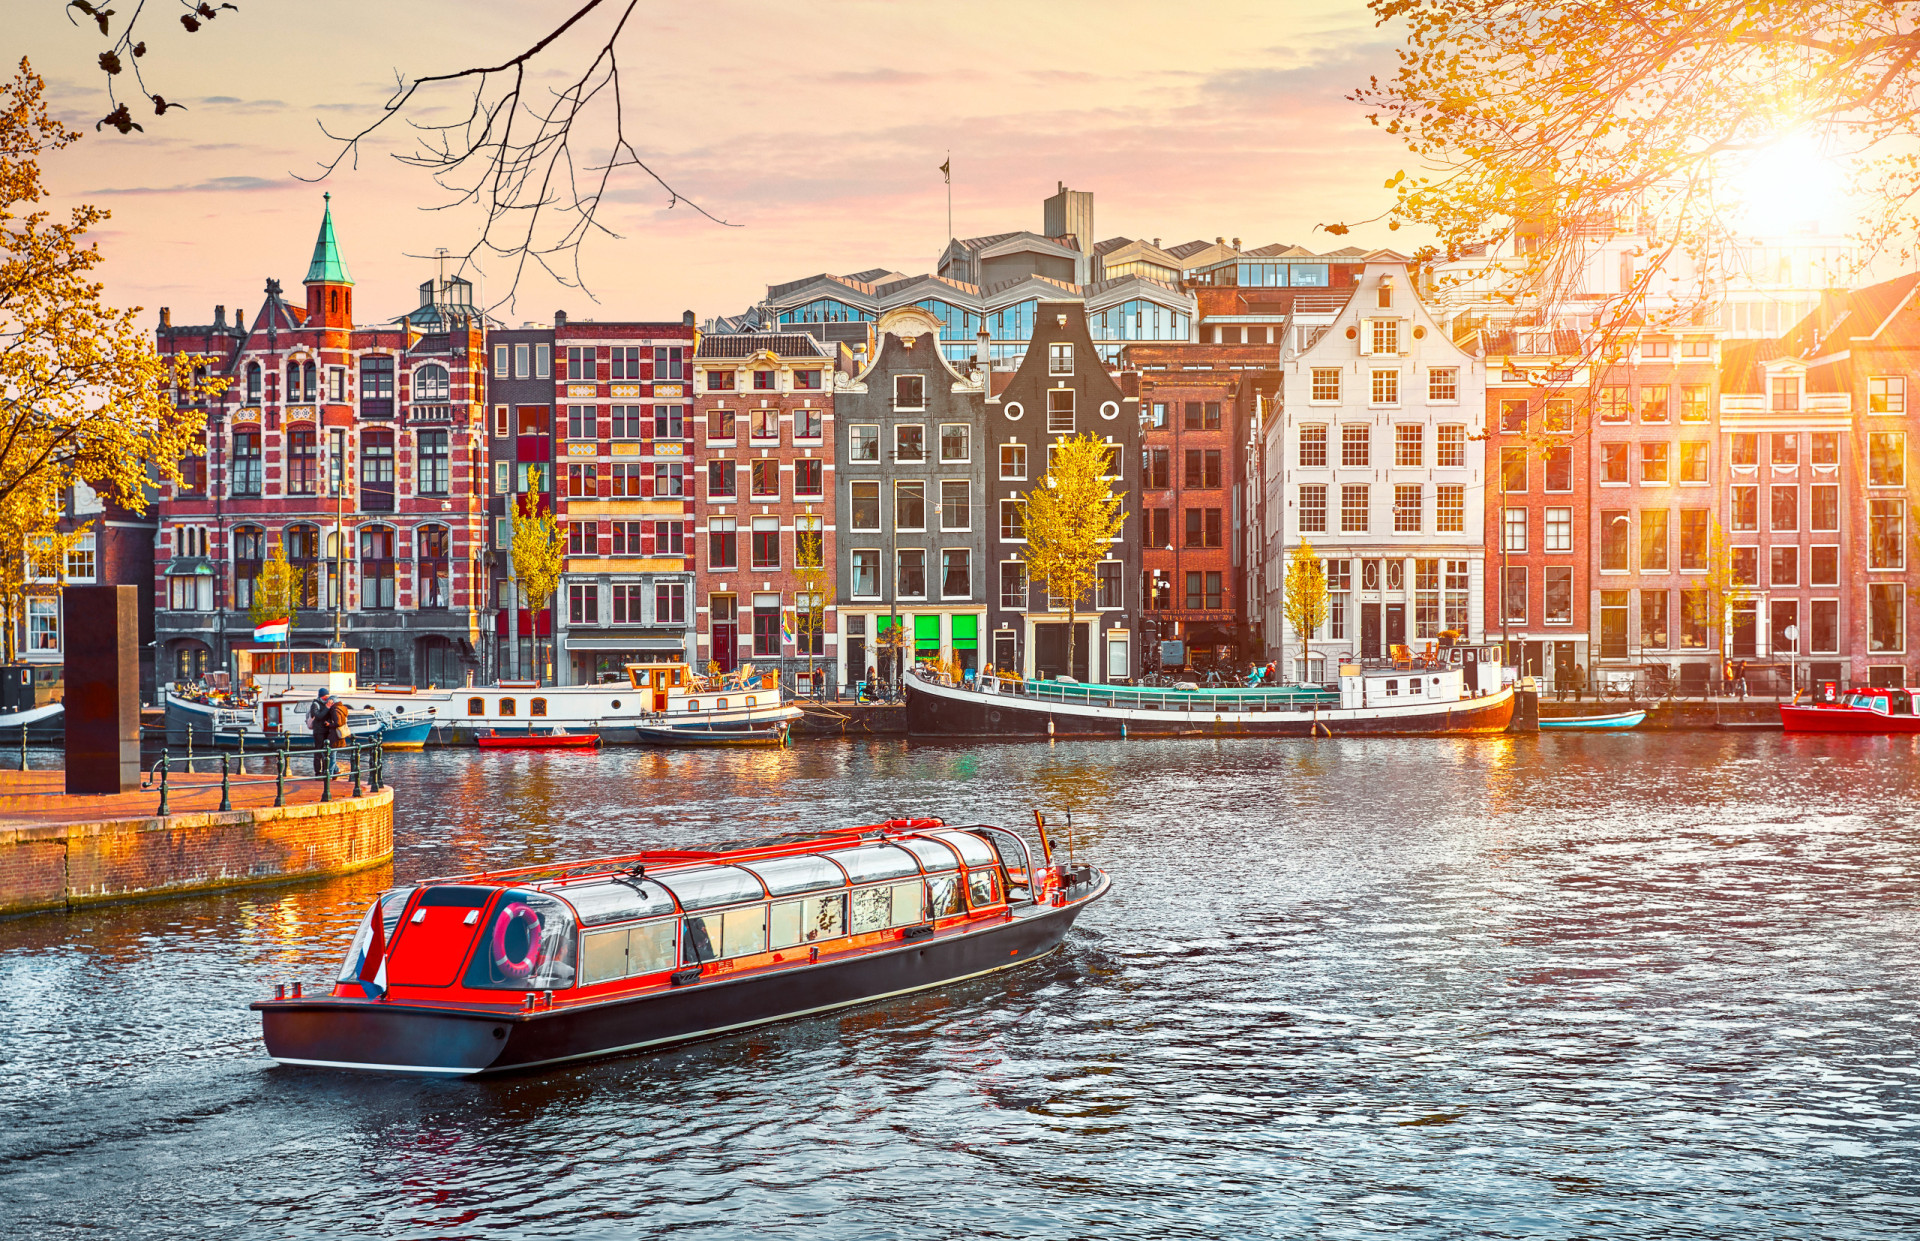 <p>Amsterdam has an overnight tourist tax of 12.5%, making it one of the most expensive in Europe. Furthermore, the city has a tax specific to transit visitors, including people on cruise ships, that charges €14 (US$15.26) per 24-hour period.</p><p>You may also like:<a href="https://www.starsinsider.com/n/347366?utm_source=msn.com&utm_medium=display&utm_campaign=referral_description&utm_content=683460en-ph"> Bizarre discoveries in the most unexpected places</a></p>